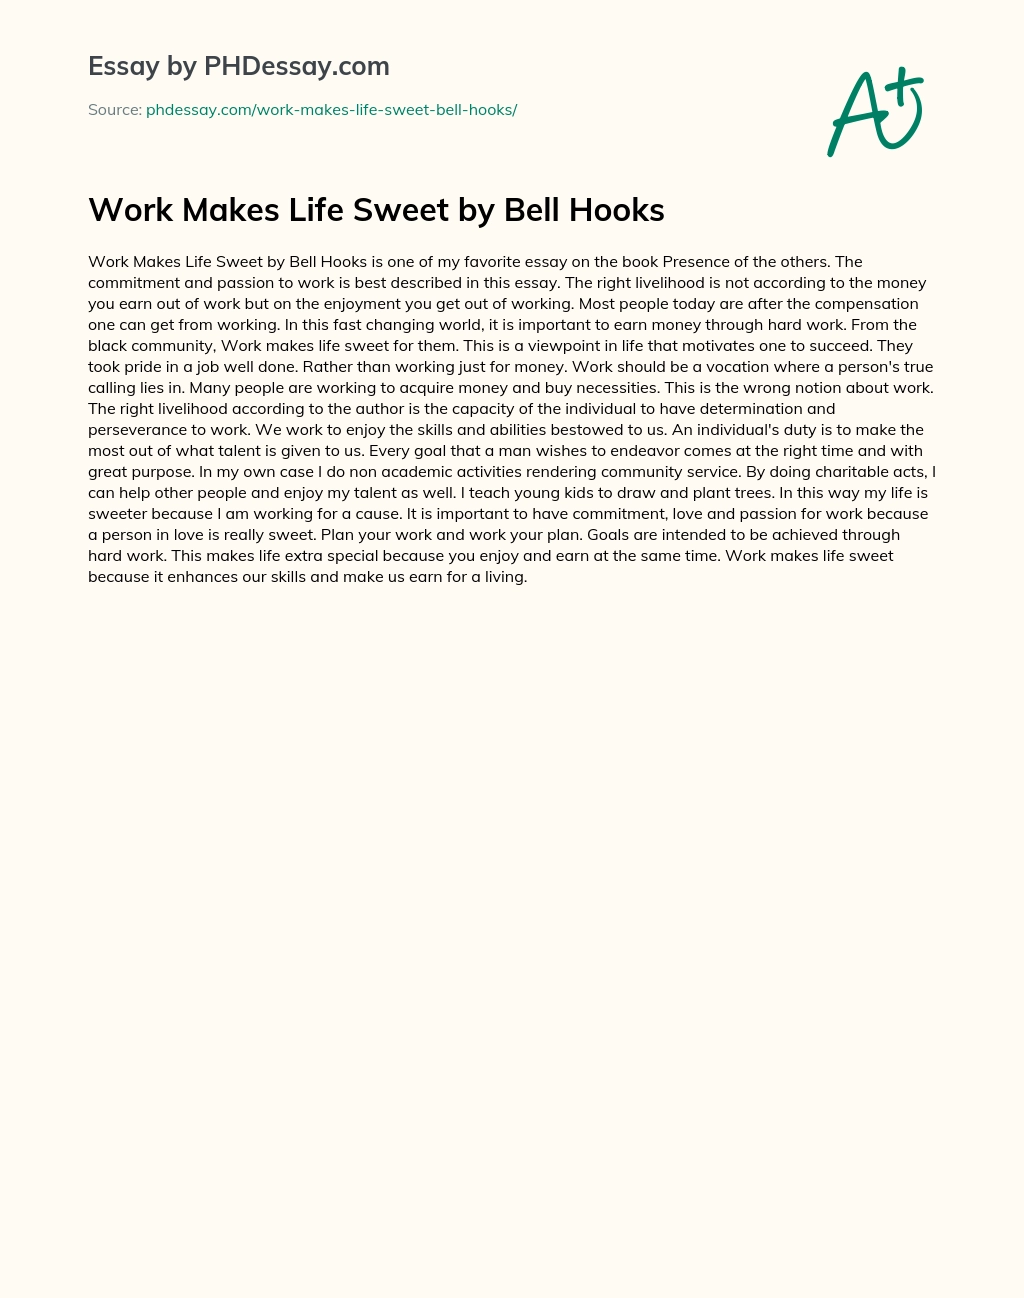 Work Makes Life Sweet by Bell Hooks essay